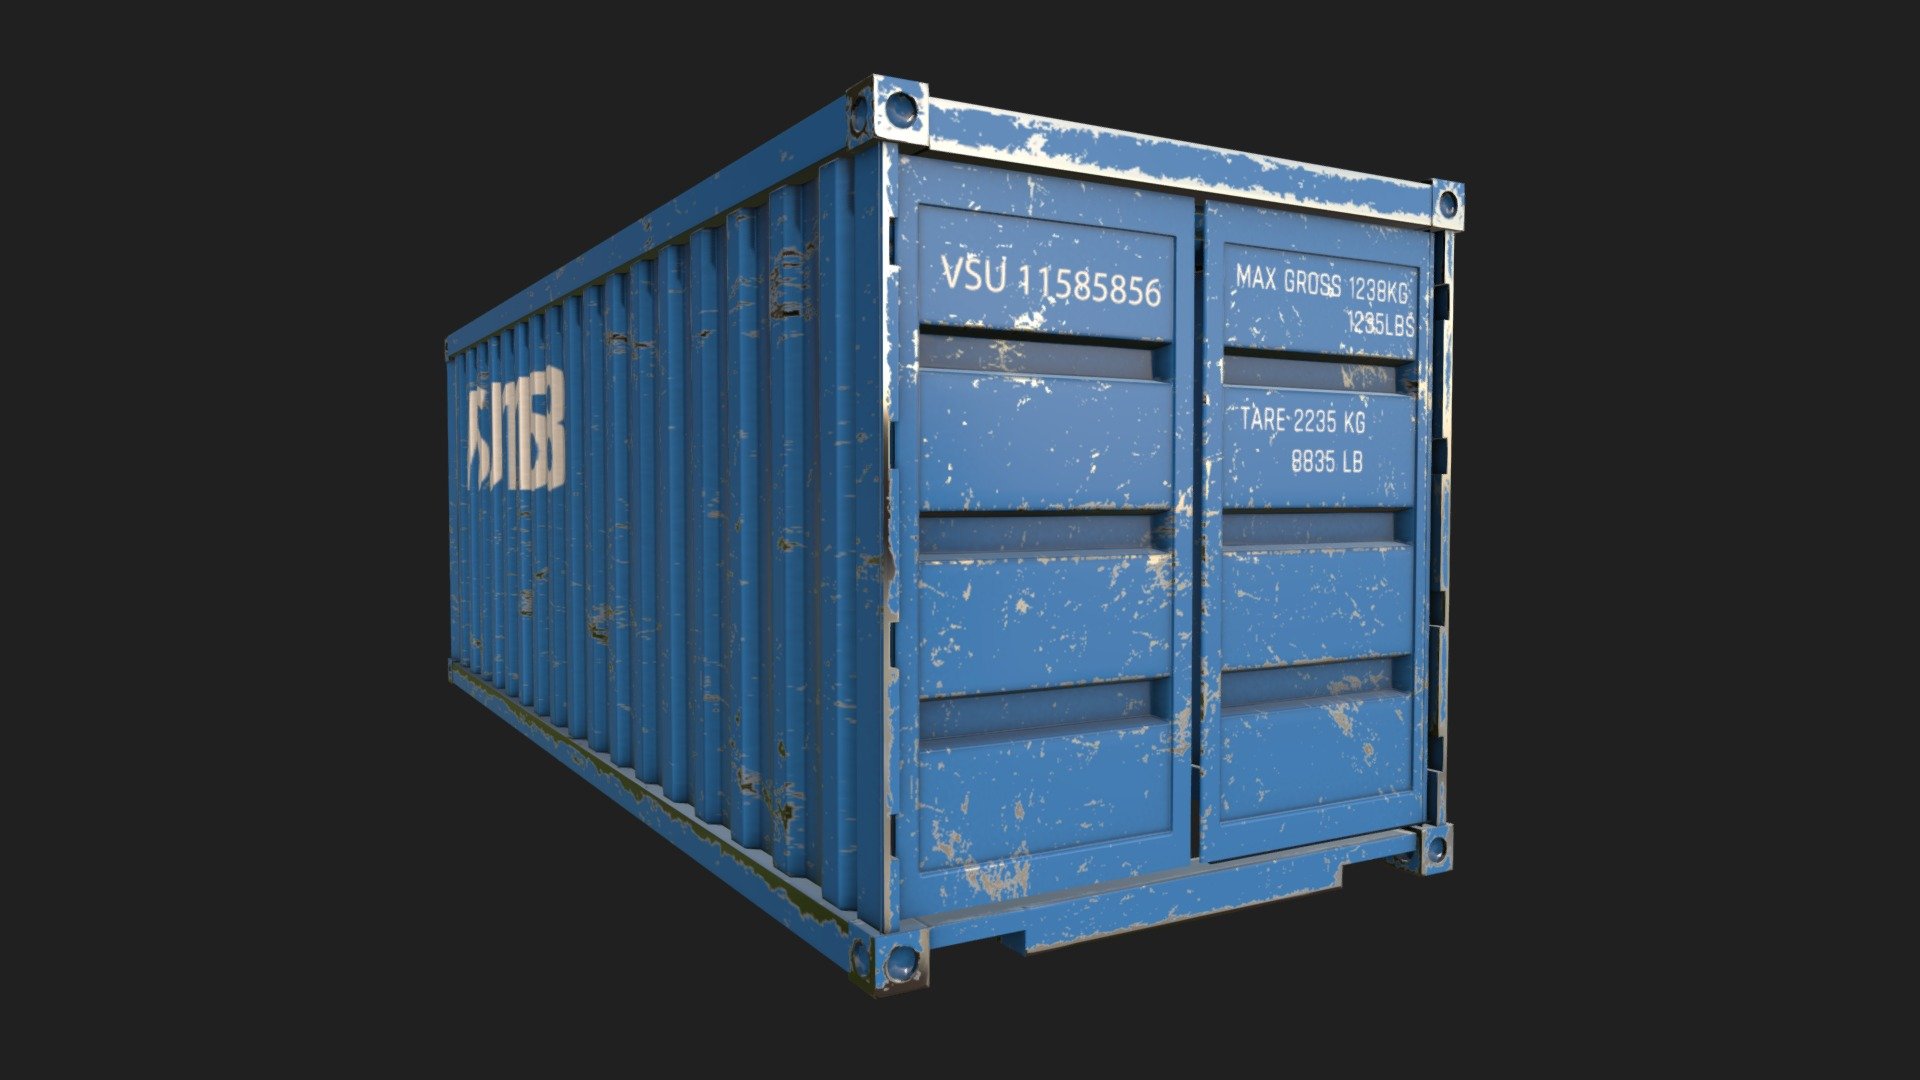 shipping  container 3ds,obj,fbx 2k ,4k texture maps , physically based render . pbr mettalic roughness 
3ds  import file compatible with sketchup - ship container - Buy Royalty Free 3D model by rebel (@512) 3d model